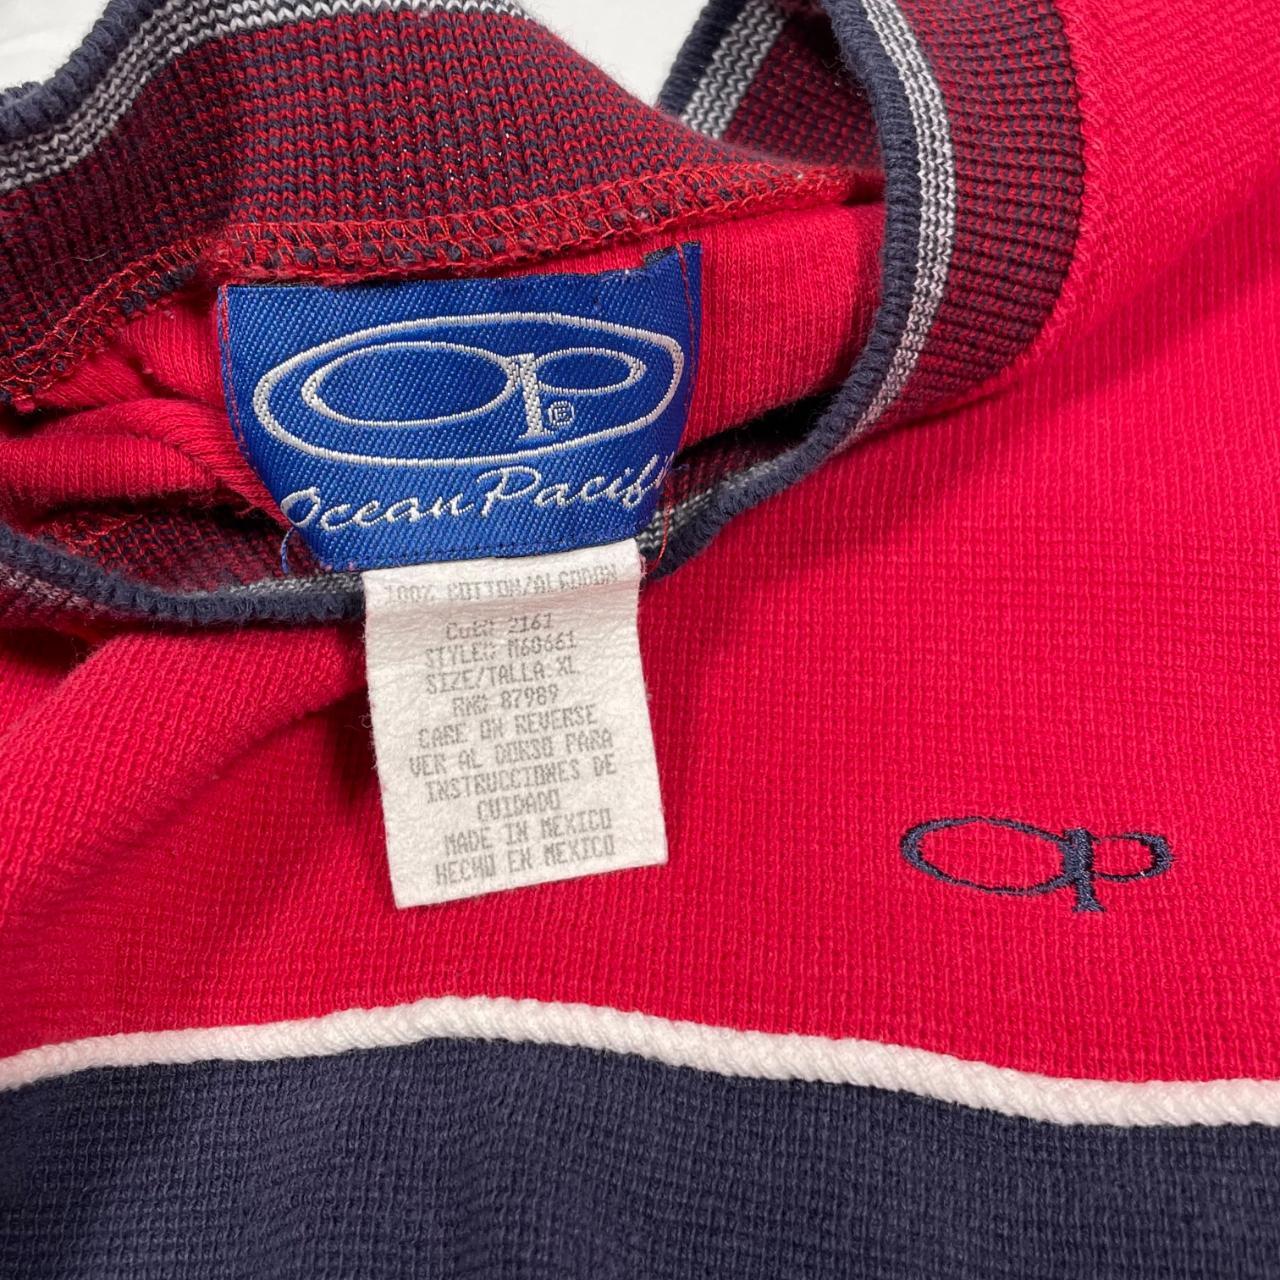 Ocean Pacific Men's Red and Navy T-shirt (4)